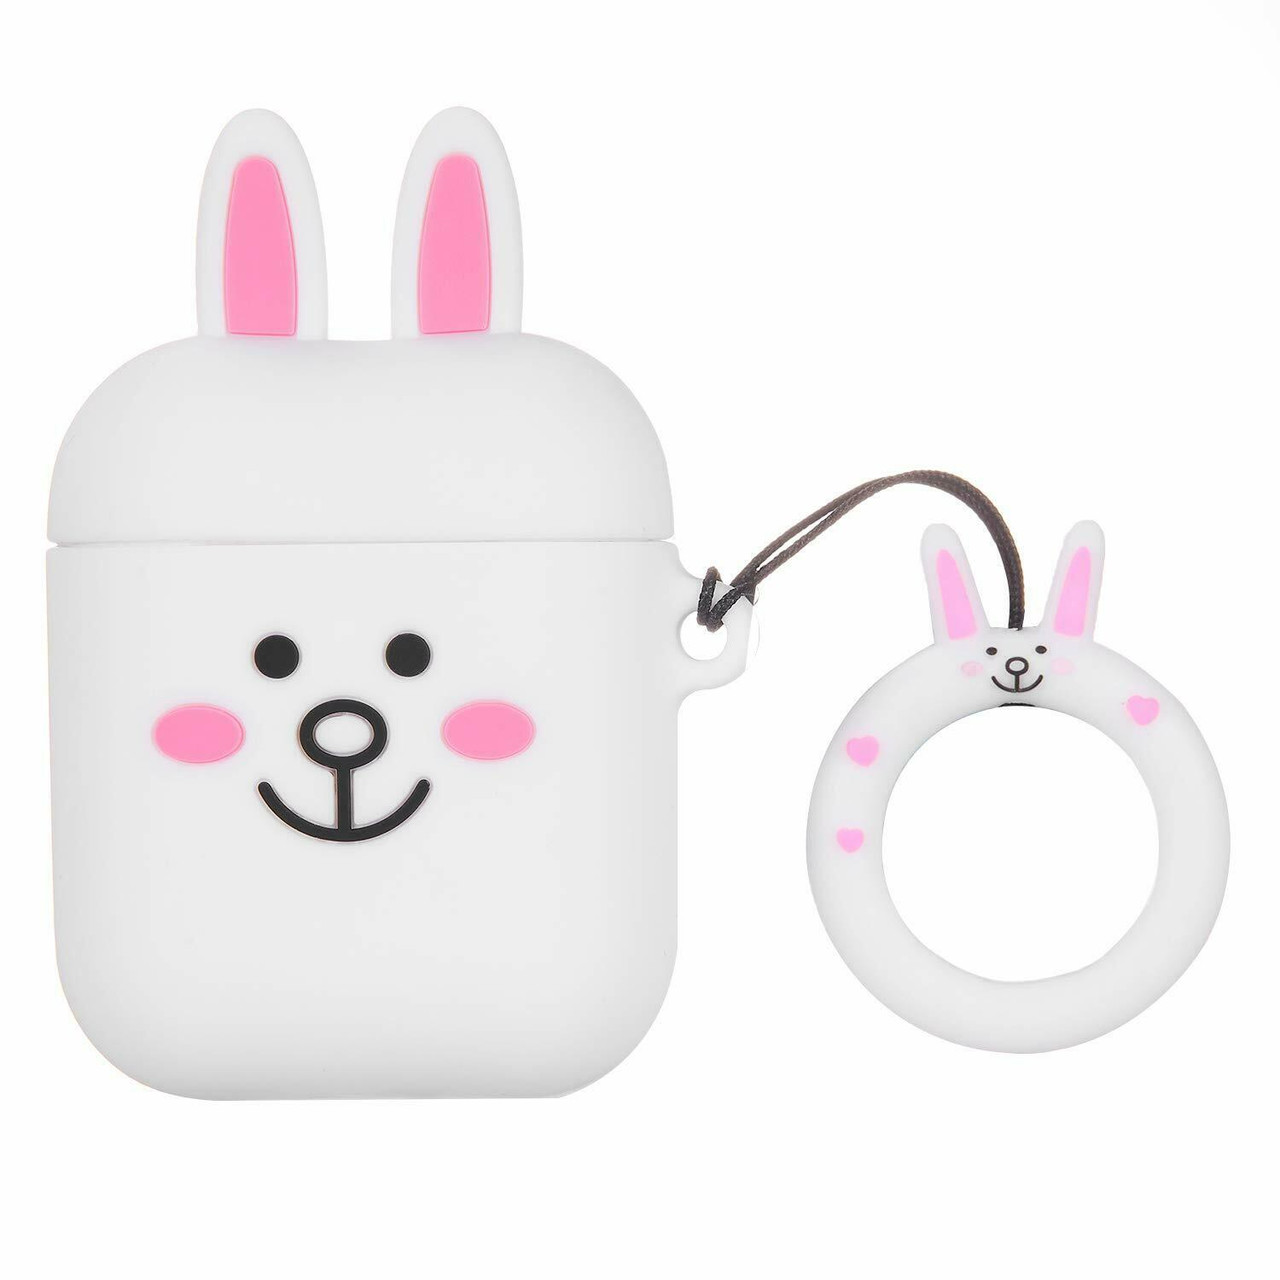 Cute 3D Cartoon Silicone Protective Case Cover For AirPod AirPods 1 2 Keychain